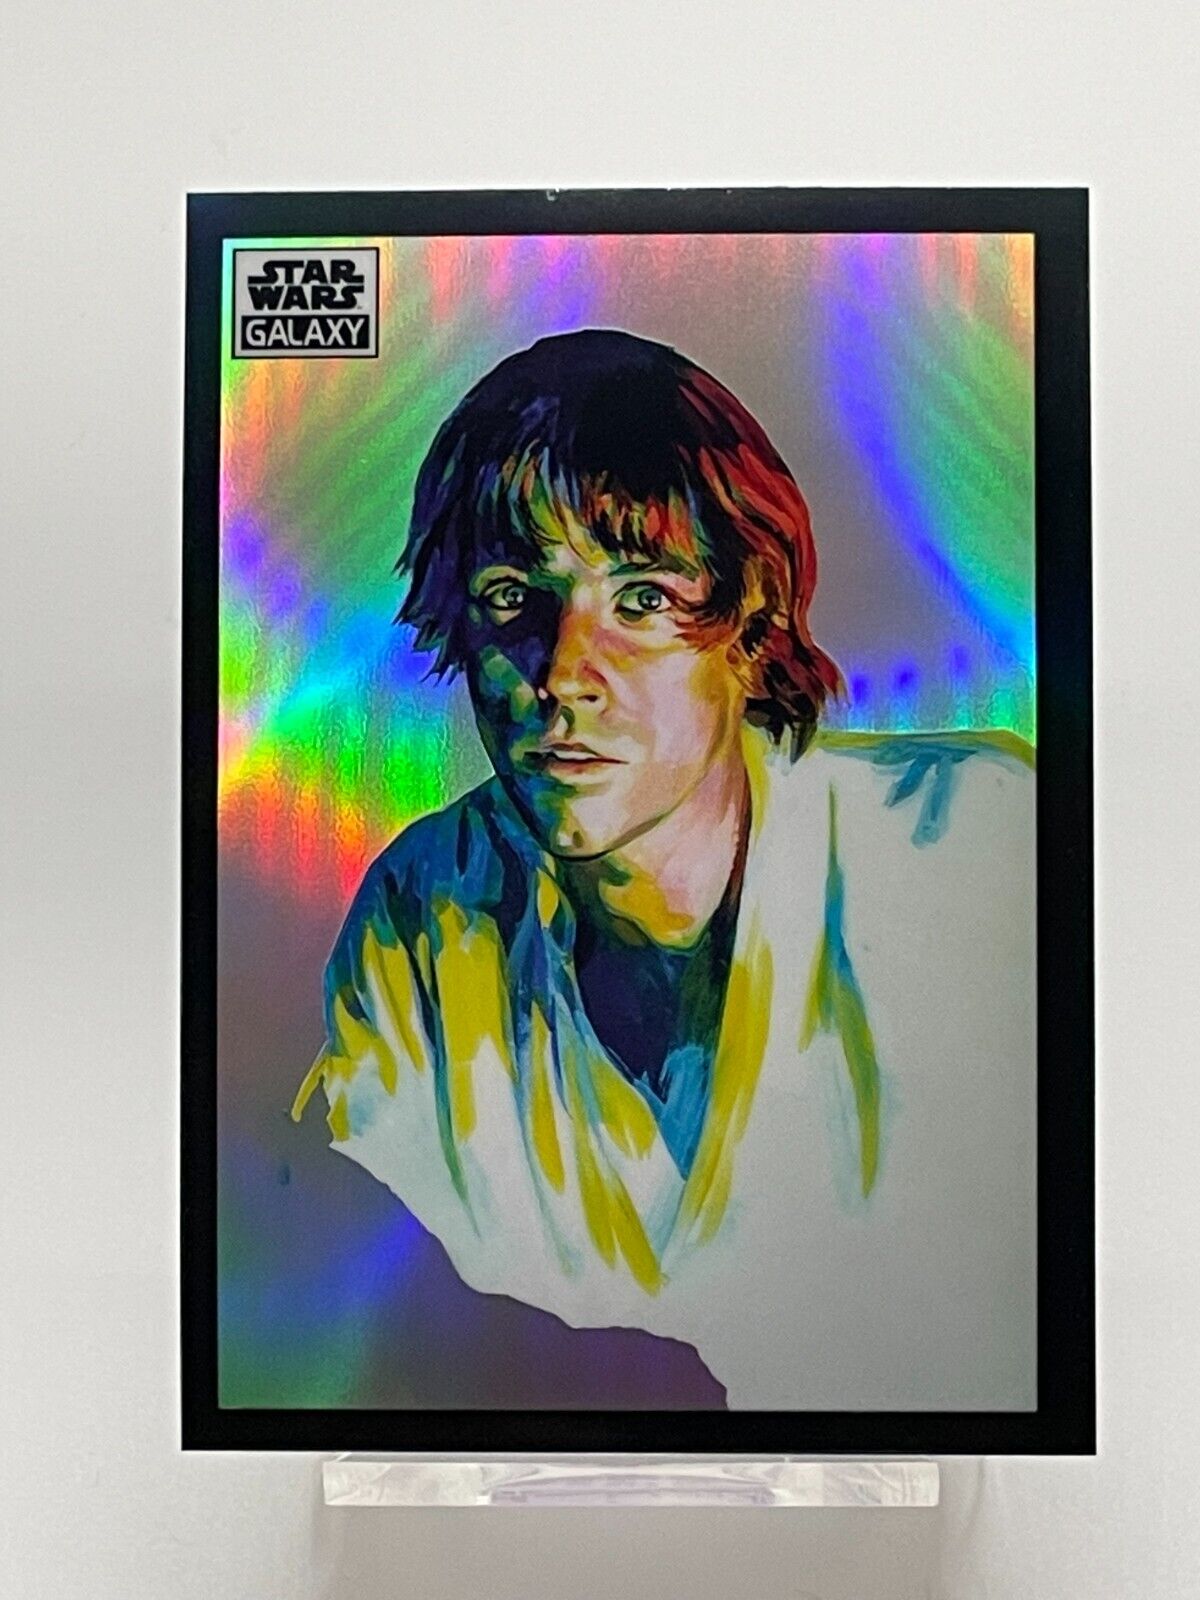 2022 Topps Chrome Star Wars Galaxy Complete Your SET, Refractor Base Card #1-100